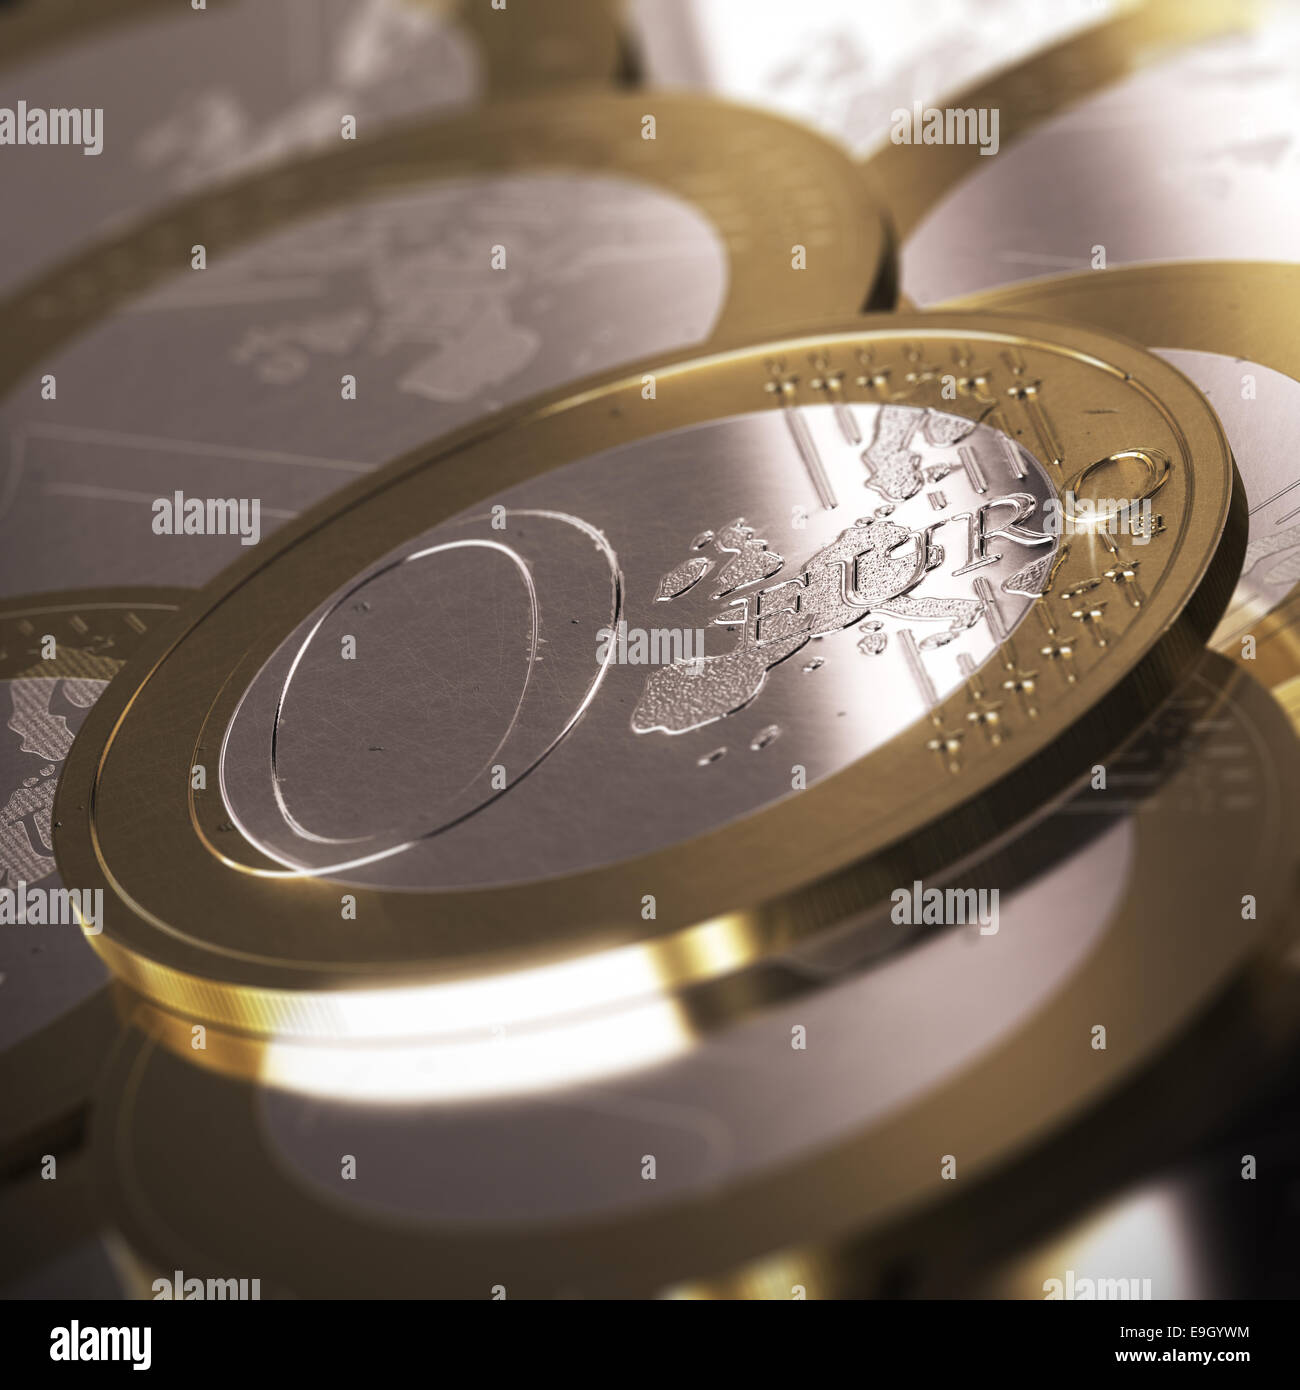 Zero Euro Coin over many other coins. Symbol of free credit, or something that cost nothing. Realistic 3D image with details, sc Stock Photo